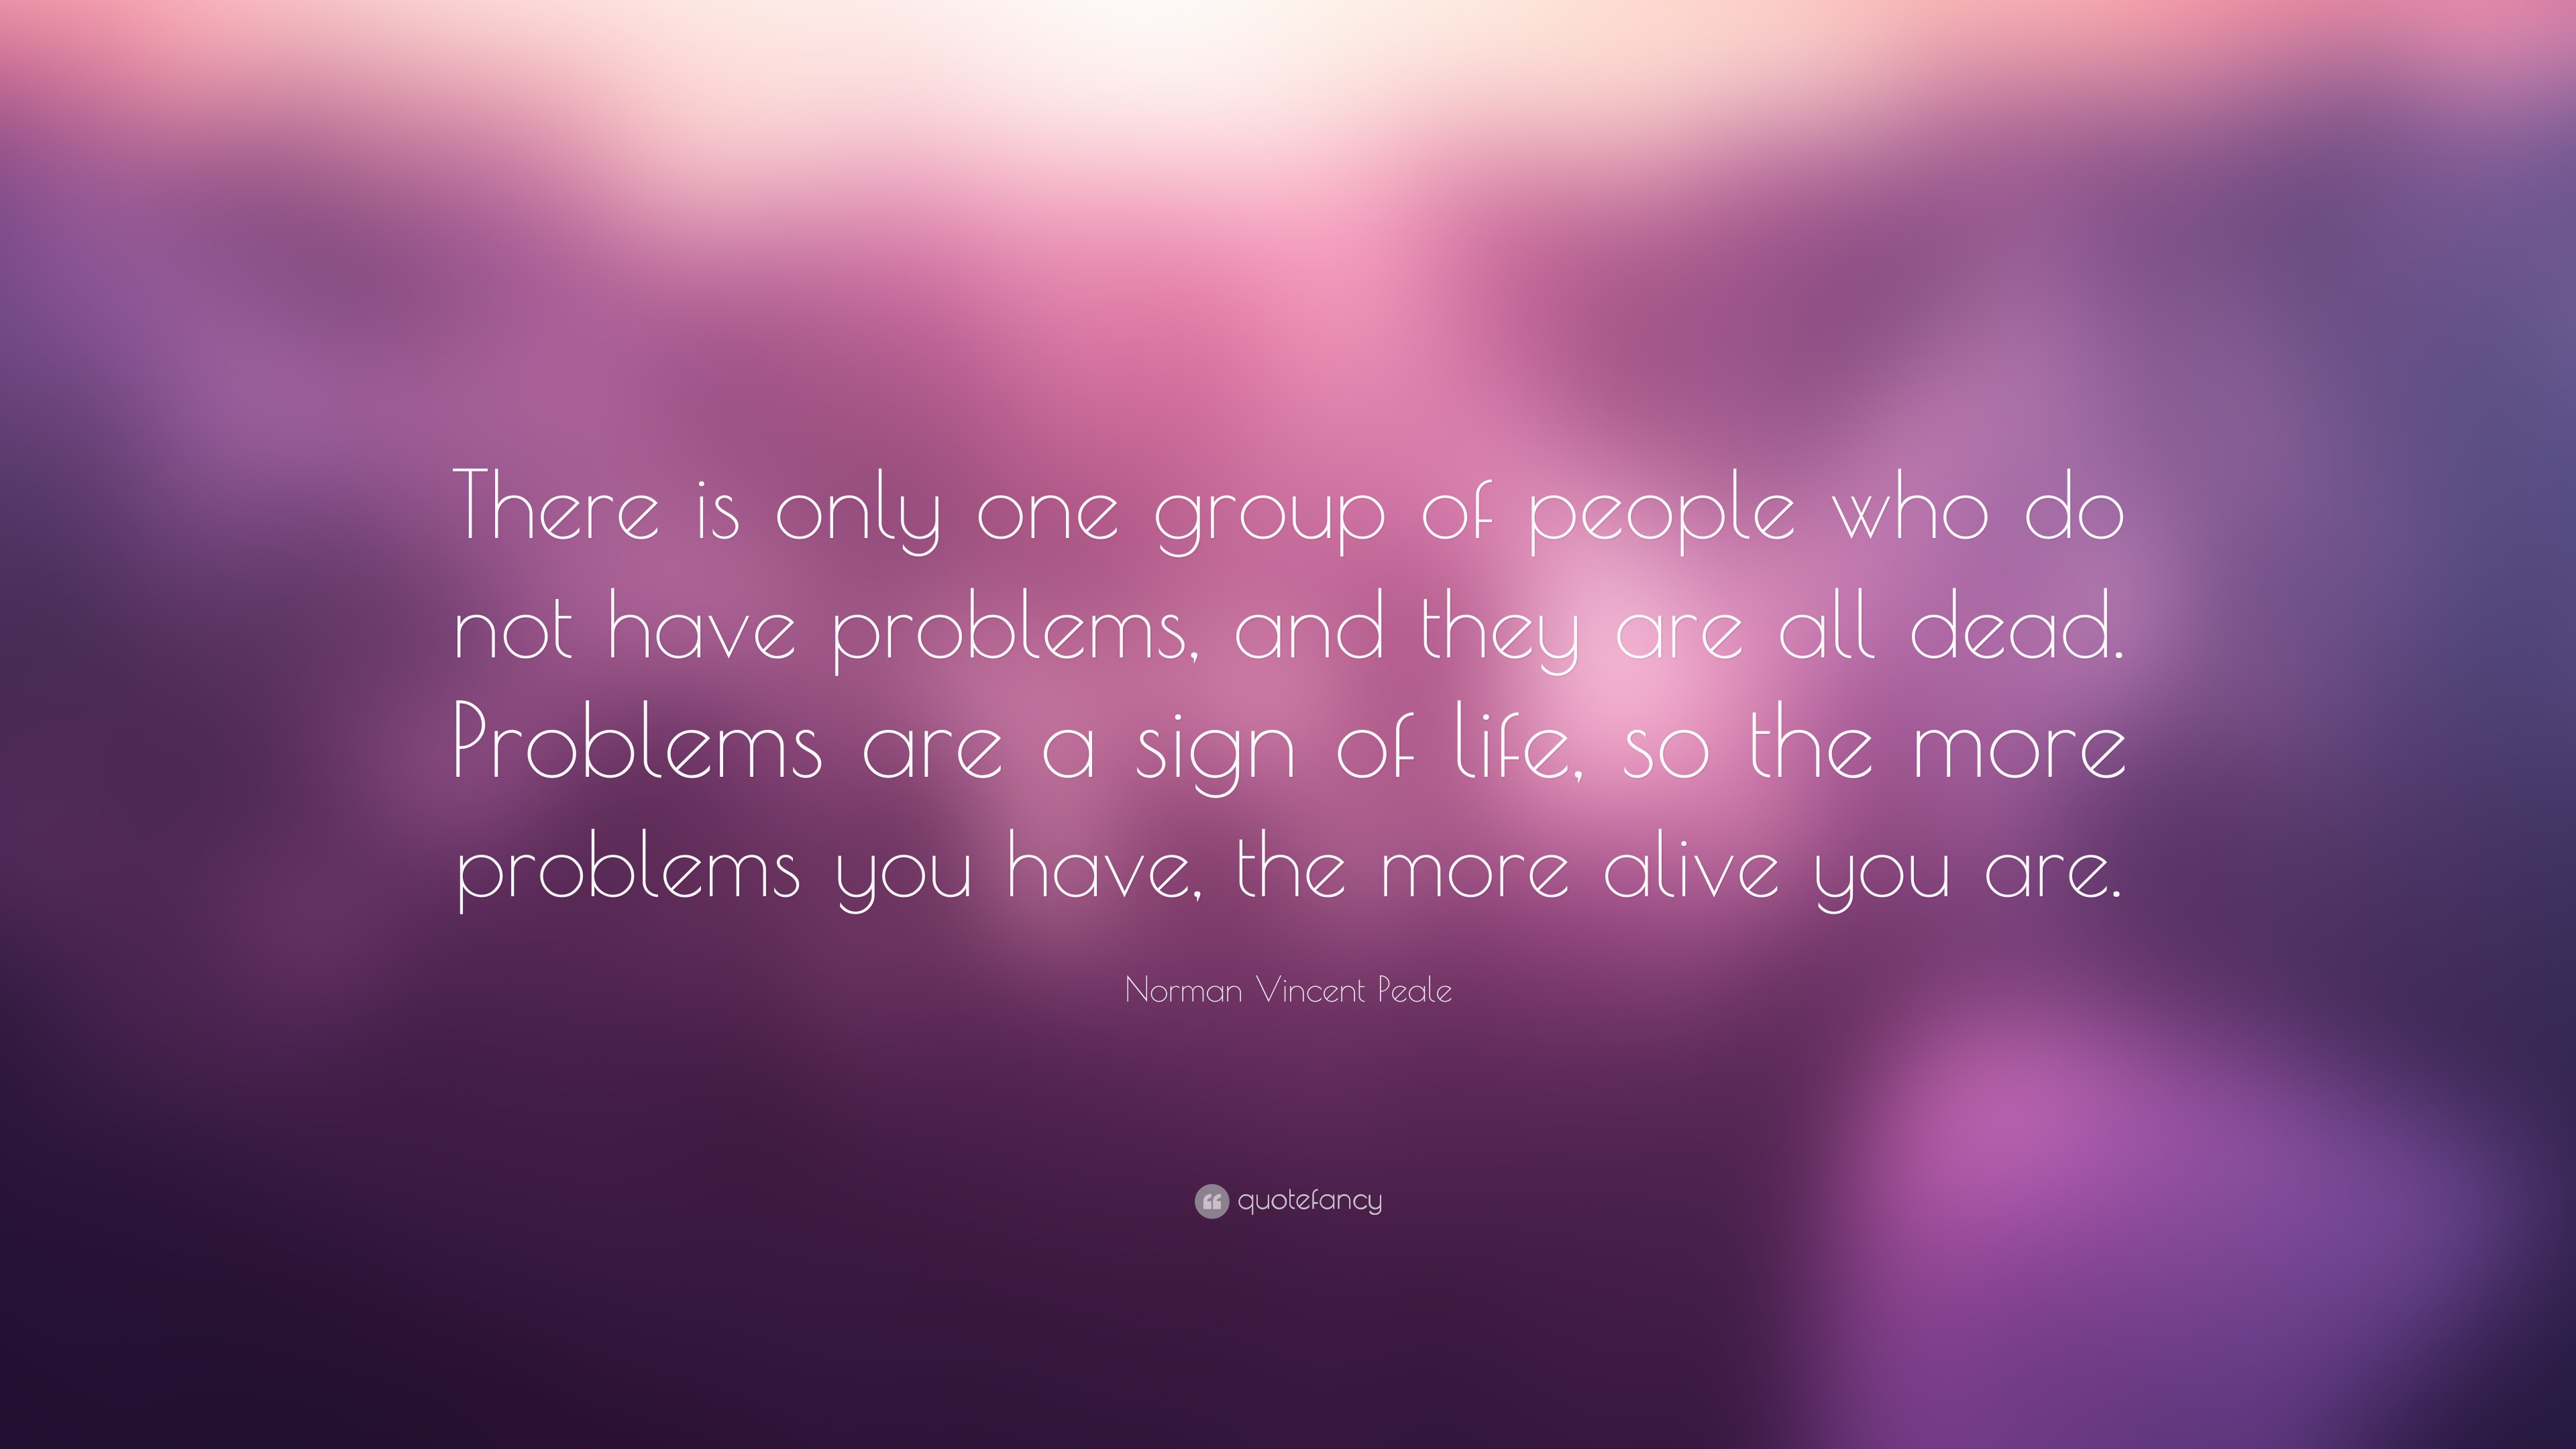 https://quotefancy.com/media/wallpaper/3840x2160/3660490-Norman-Vincent-Peale-Quote-There-is-only-one-group-of-people-who.jpg